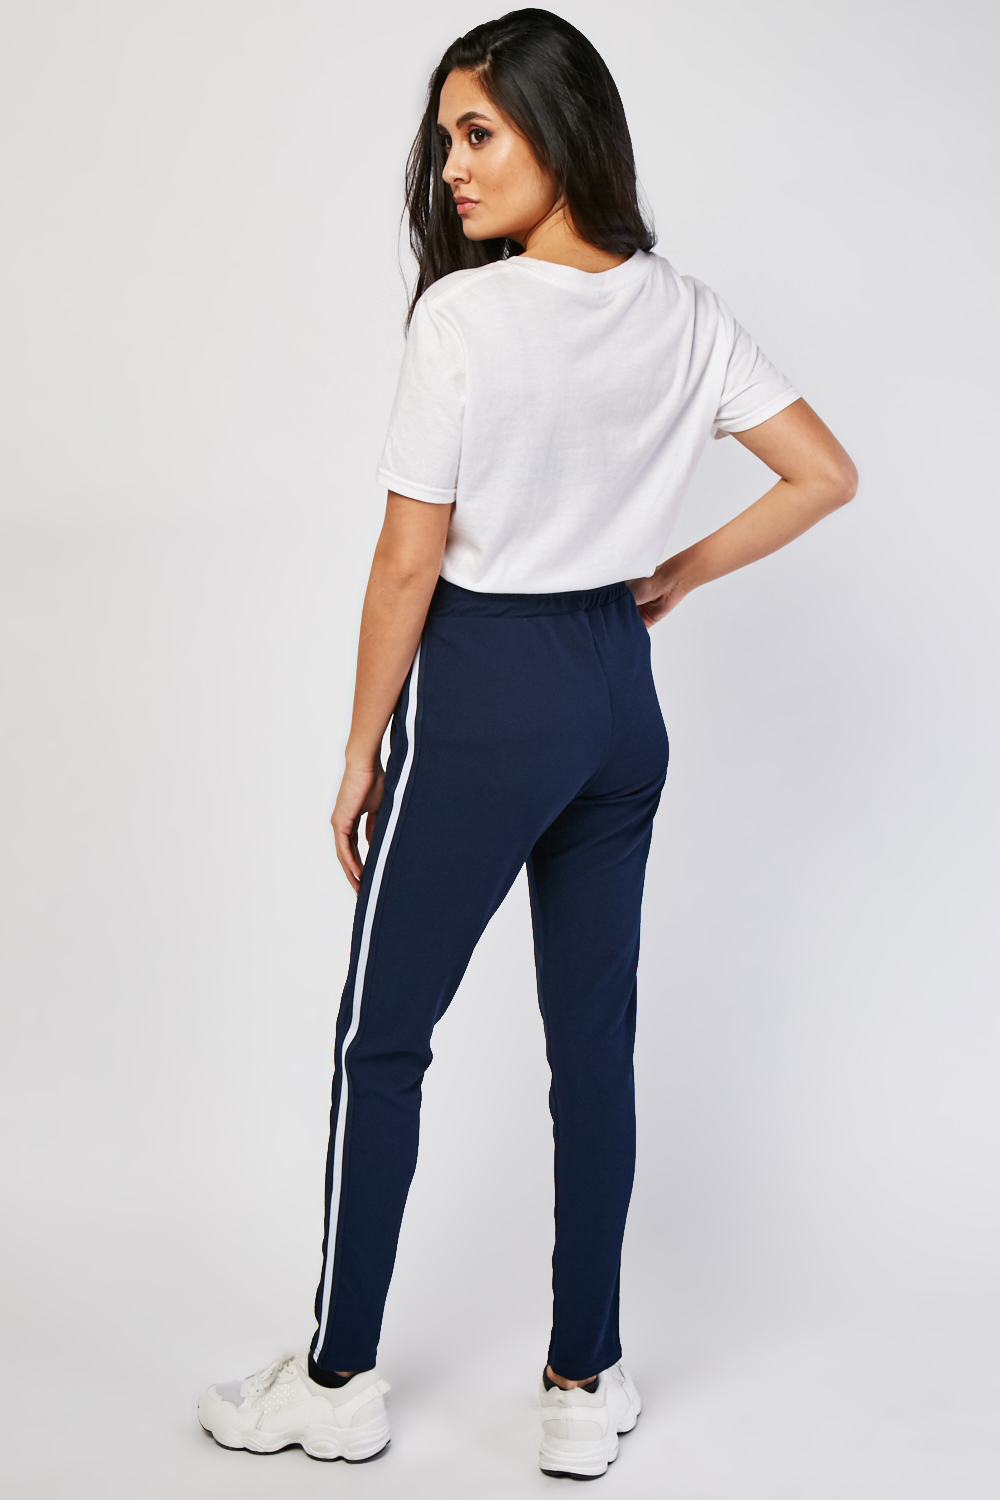 Striped Side Jogger Pants - Just $7